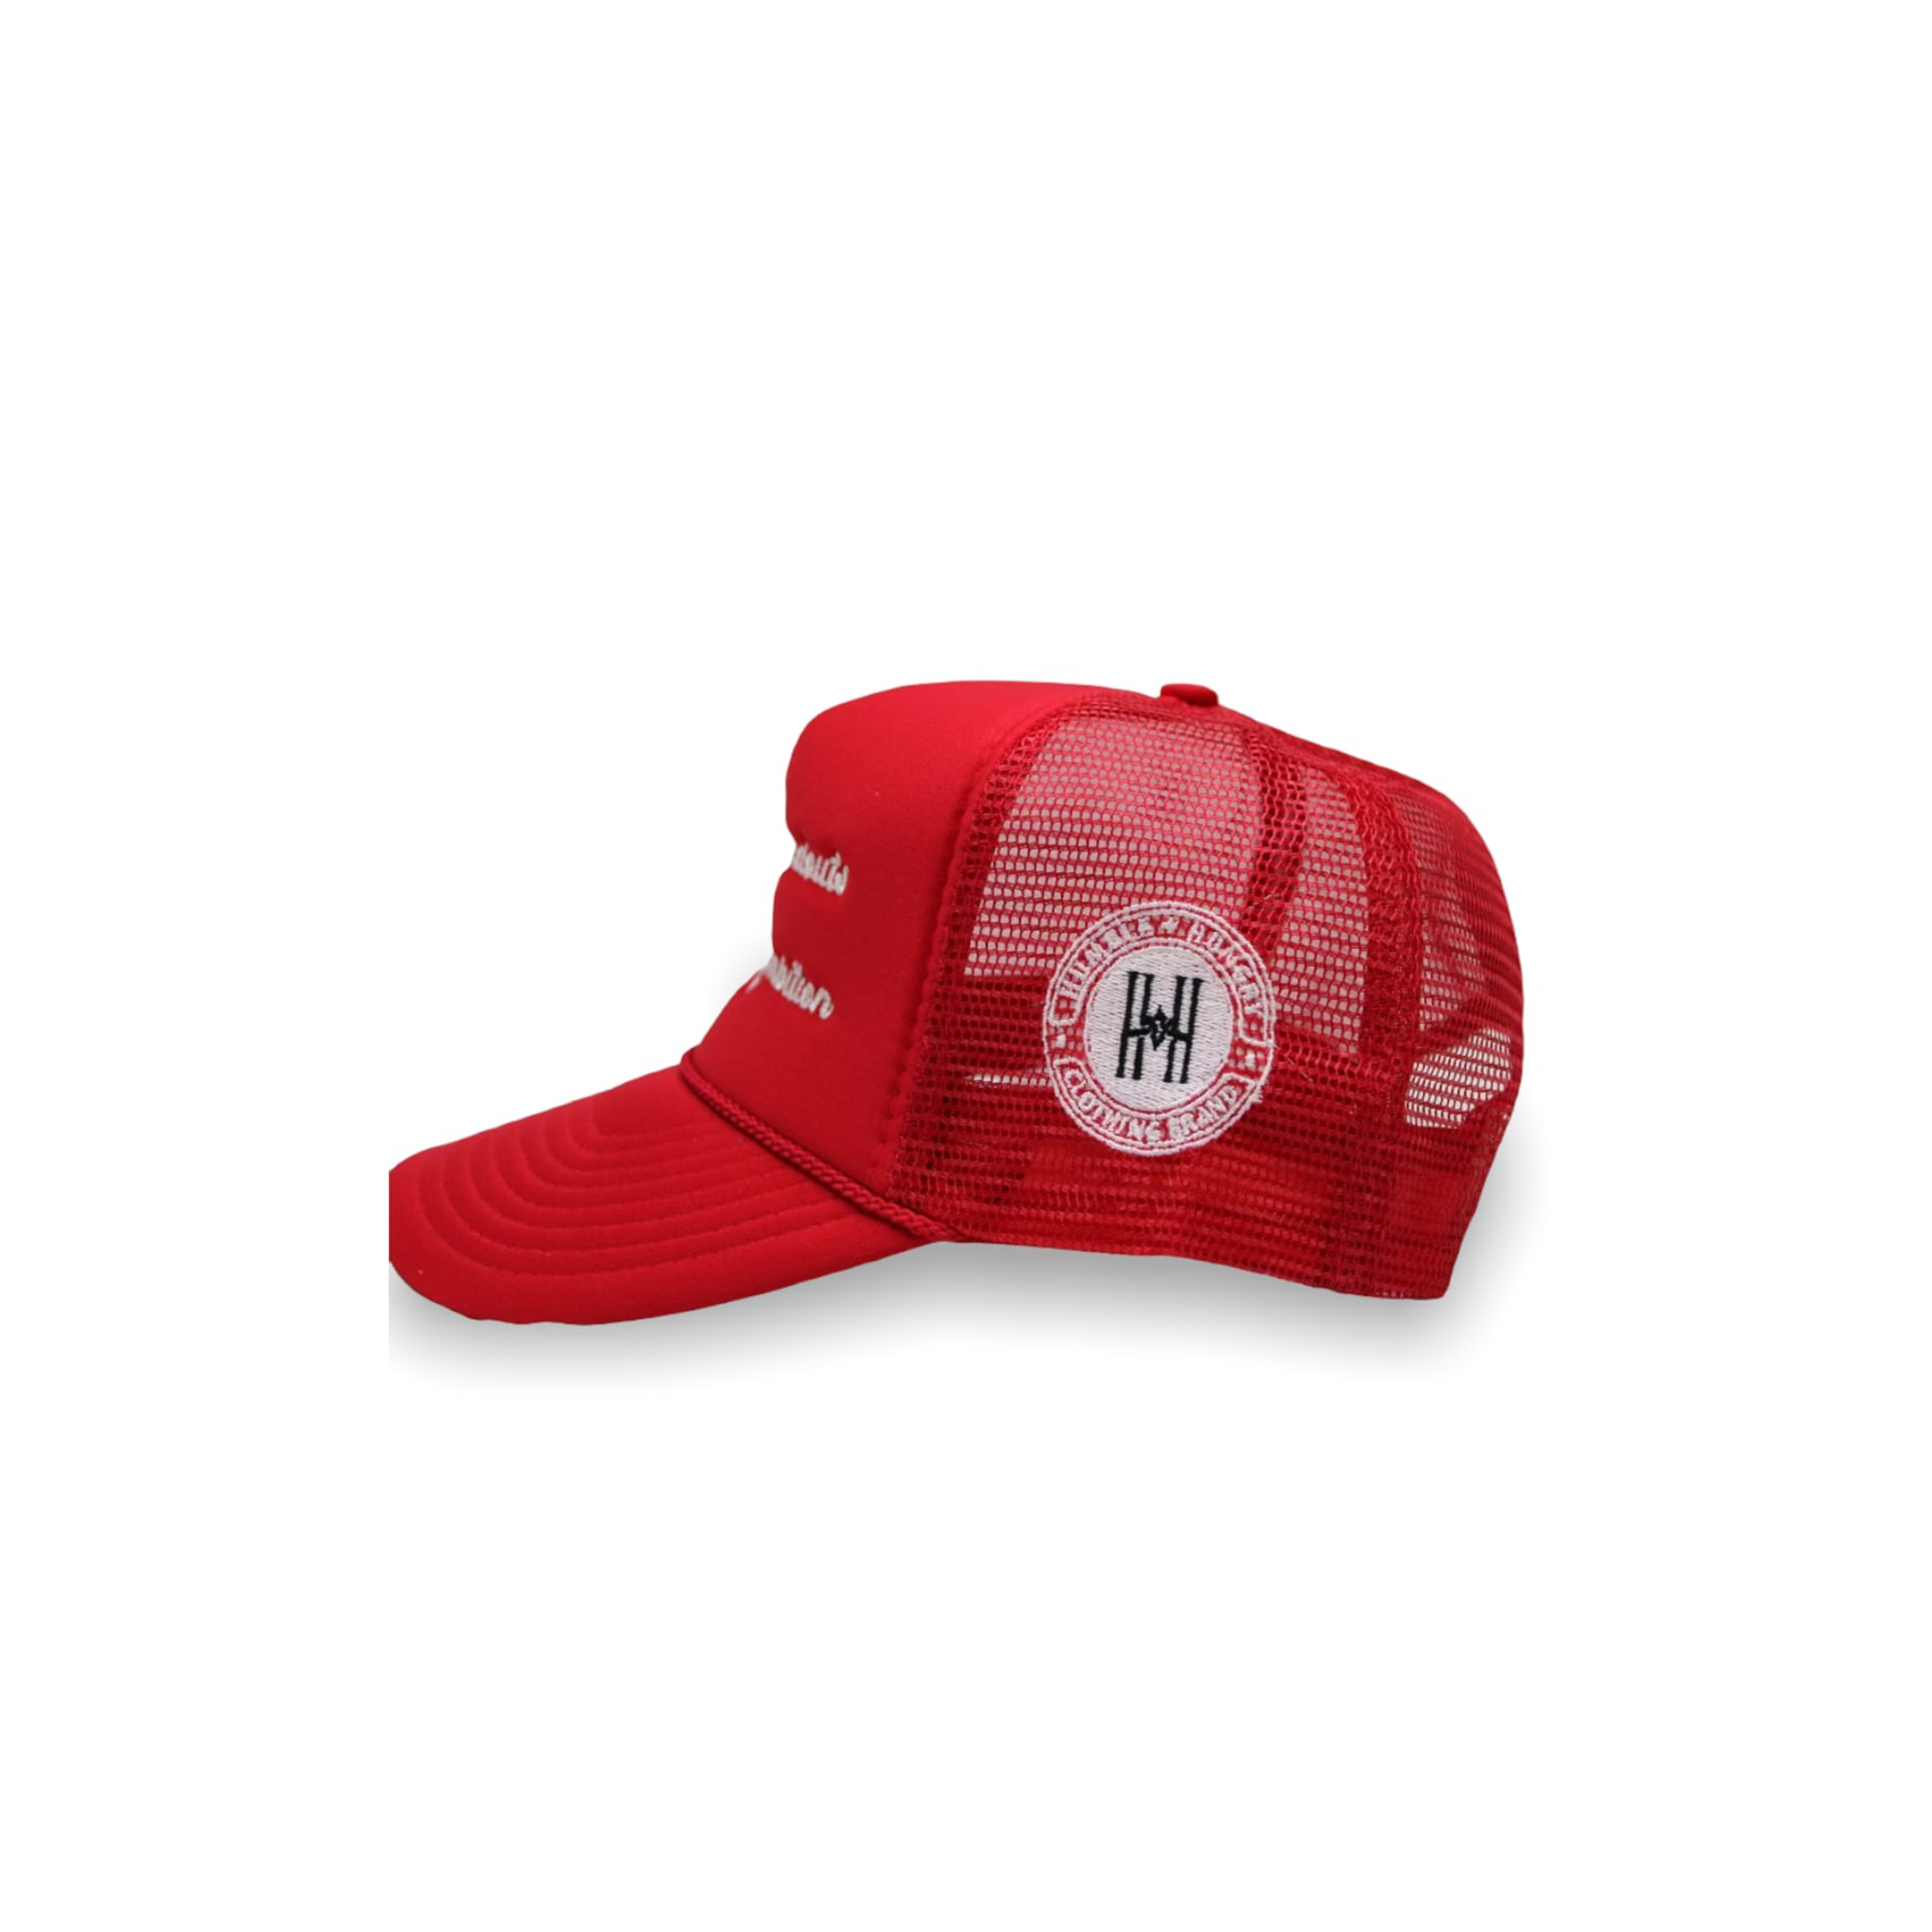 'All Ambition' Trucker Hat in Red